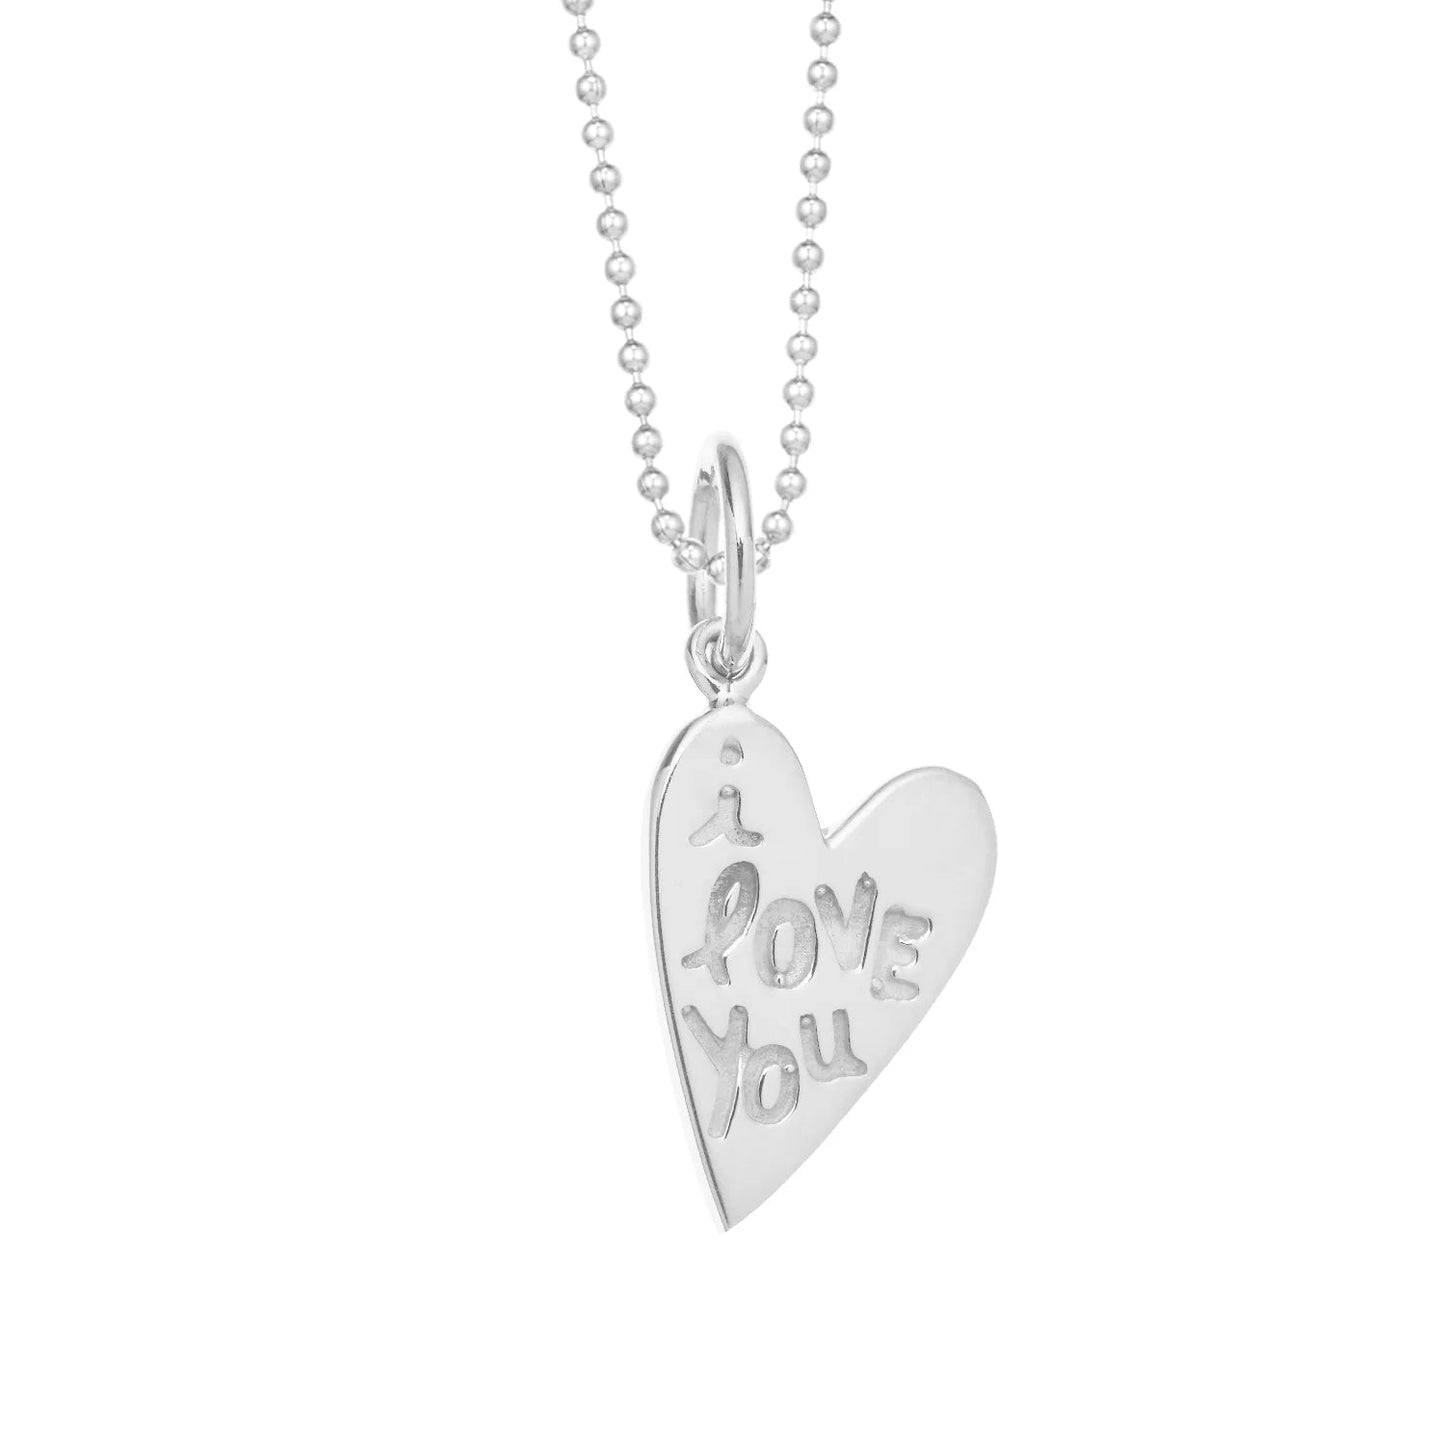 I LOVE YOU HEART in Sterling Silver - Something about Sofia